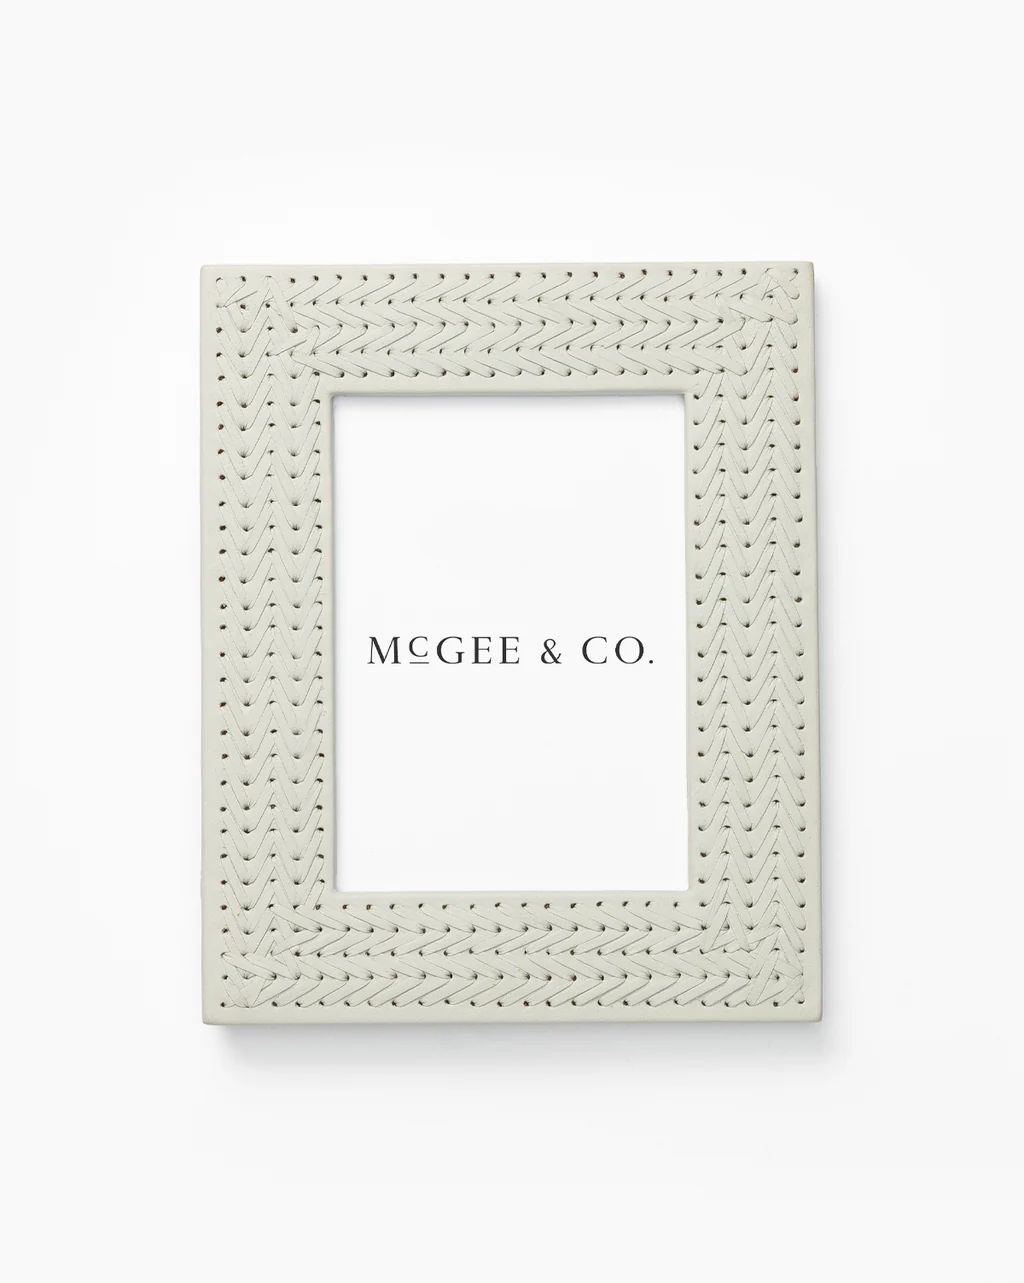 Stitched Leather Frame | McGee & Co.